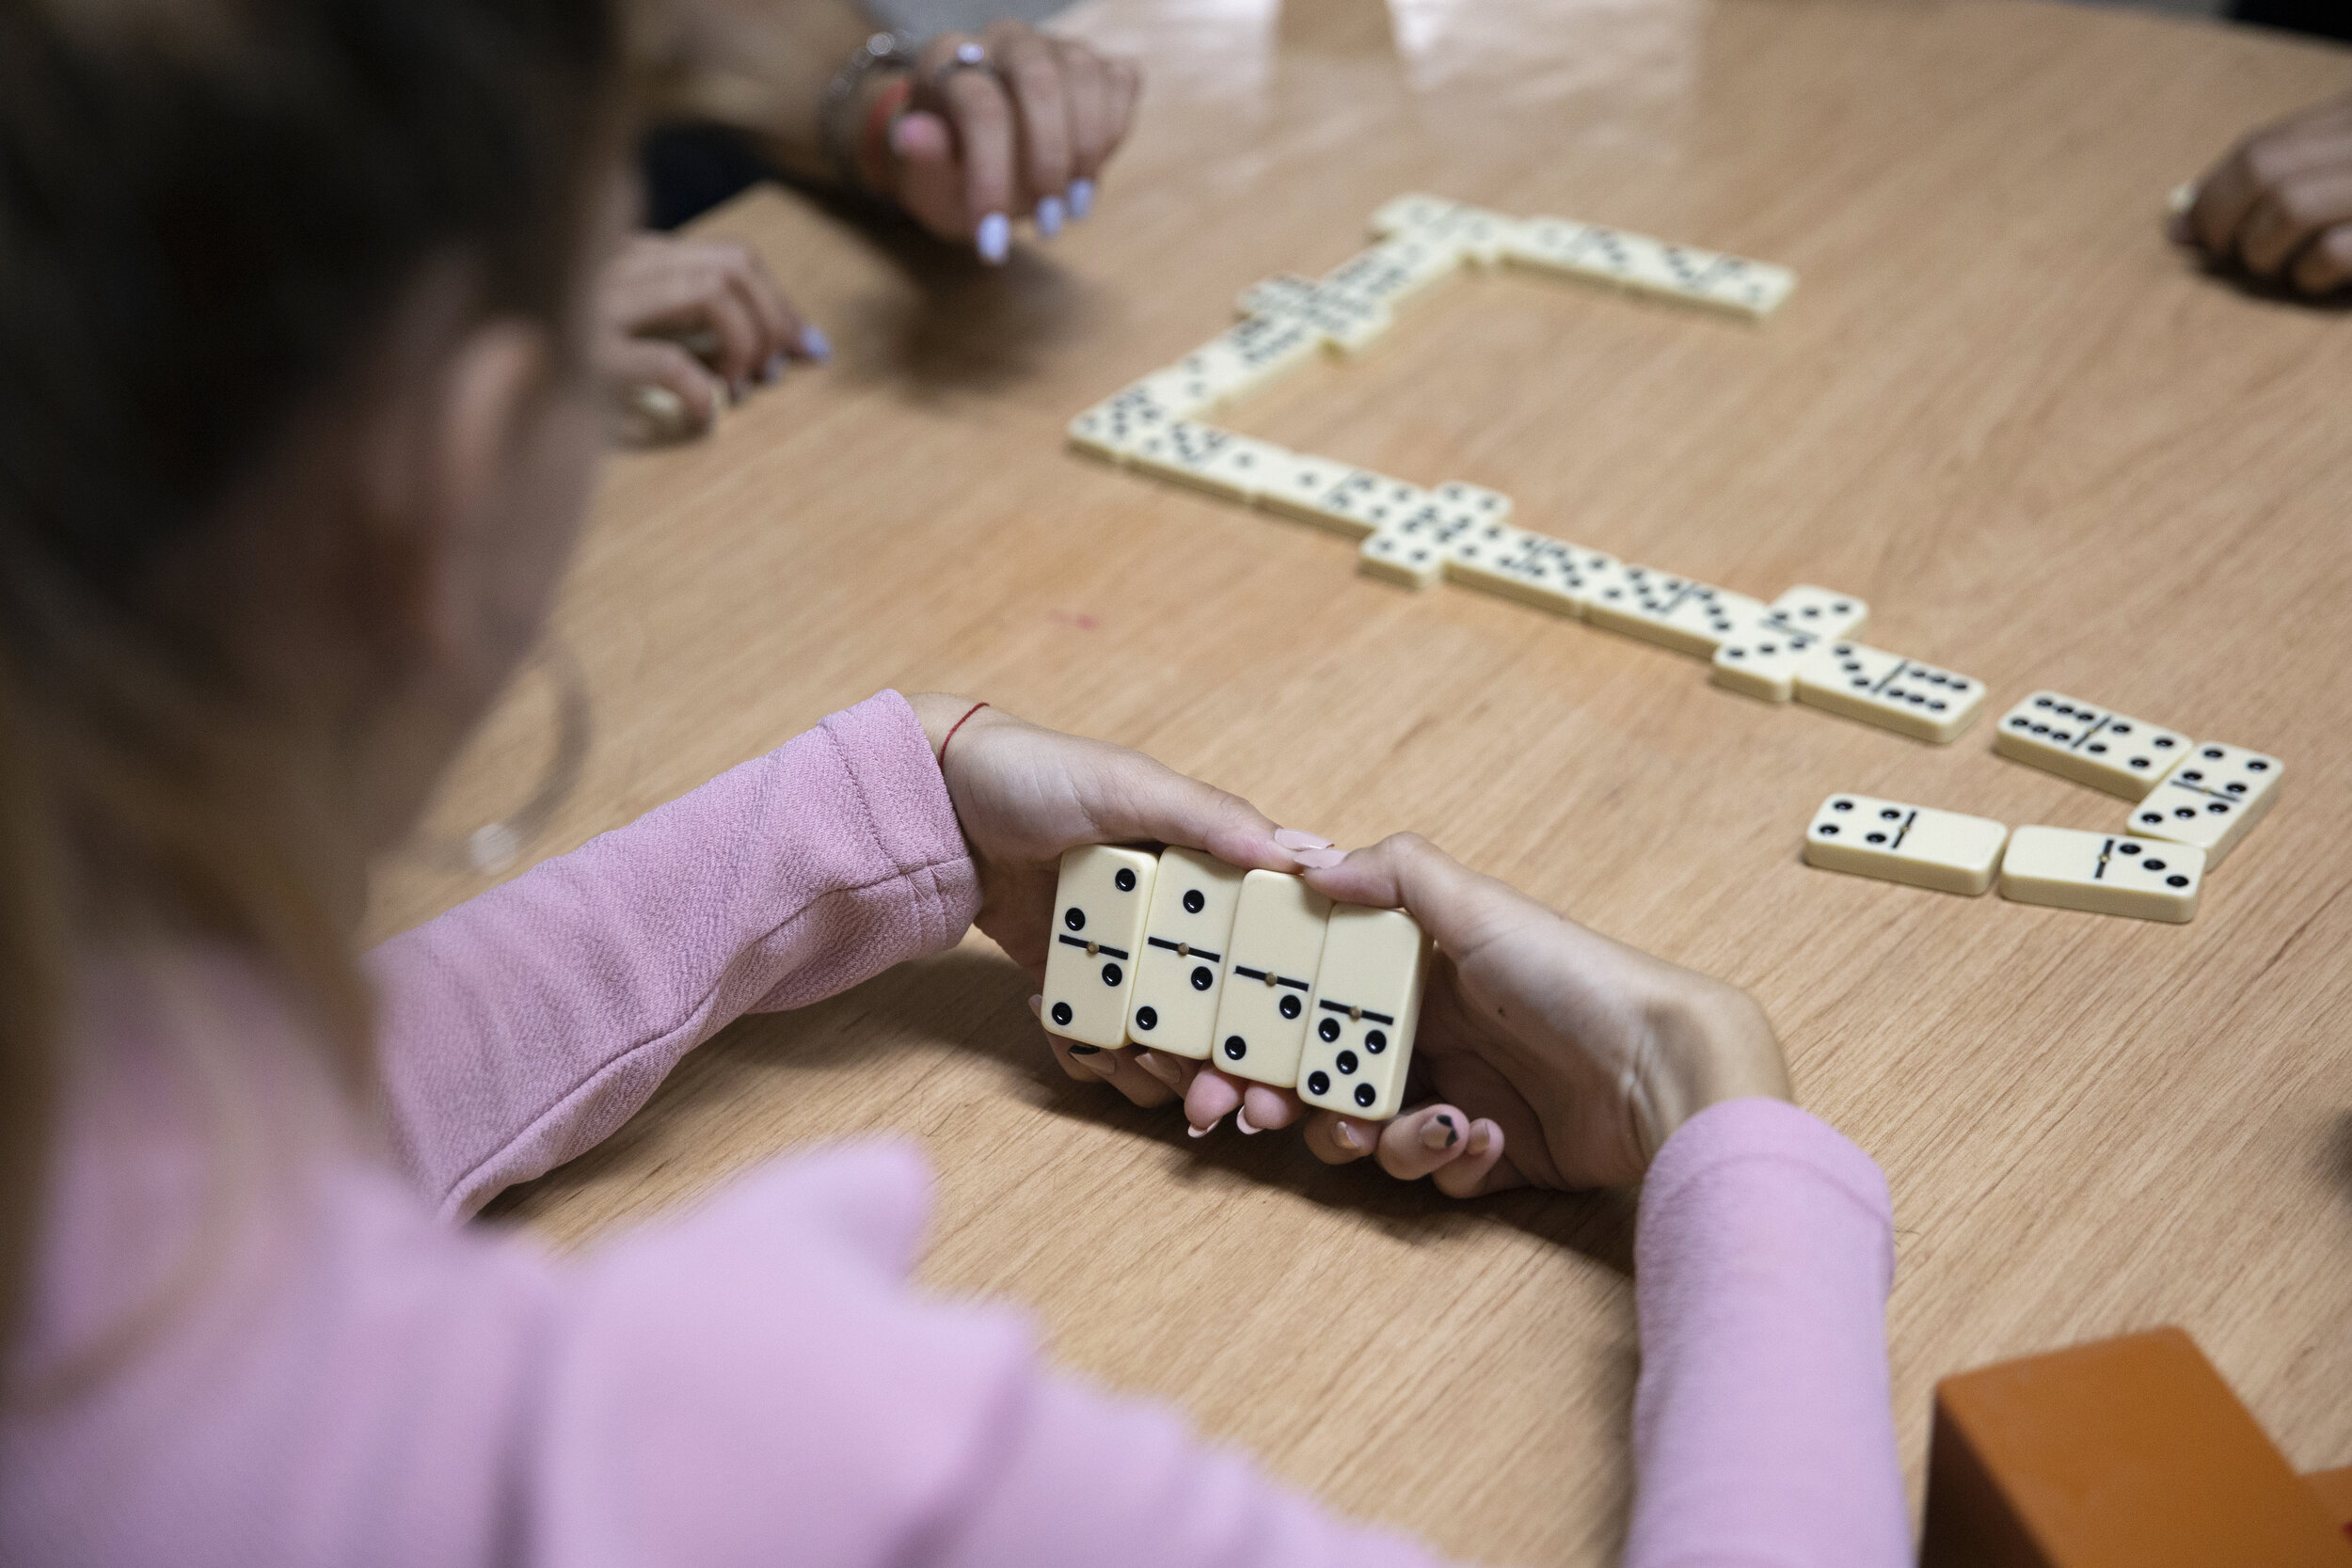  Adri plays dominoes with the other members of Beth Shalom’s youth group in the basement of the temple on January 18, 2020. When Quiñones was in her second year of pharmacy school at the University of Havana, she would travel an hour from her univers